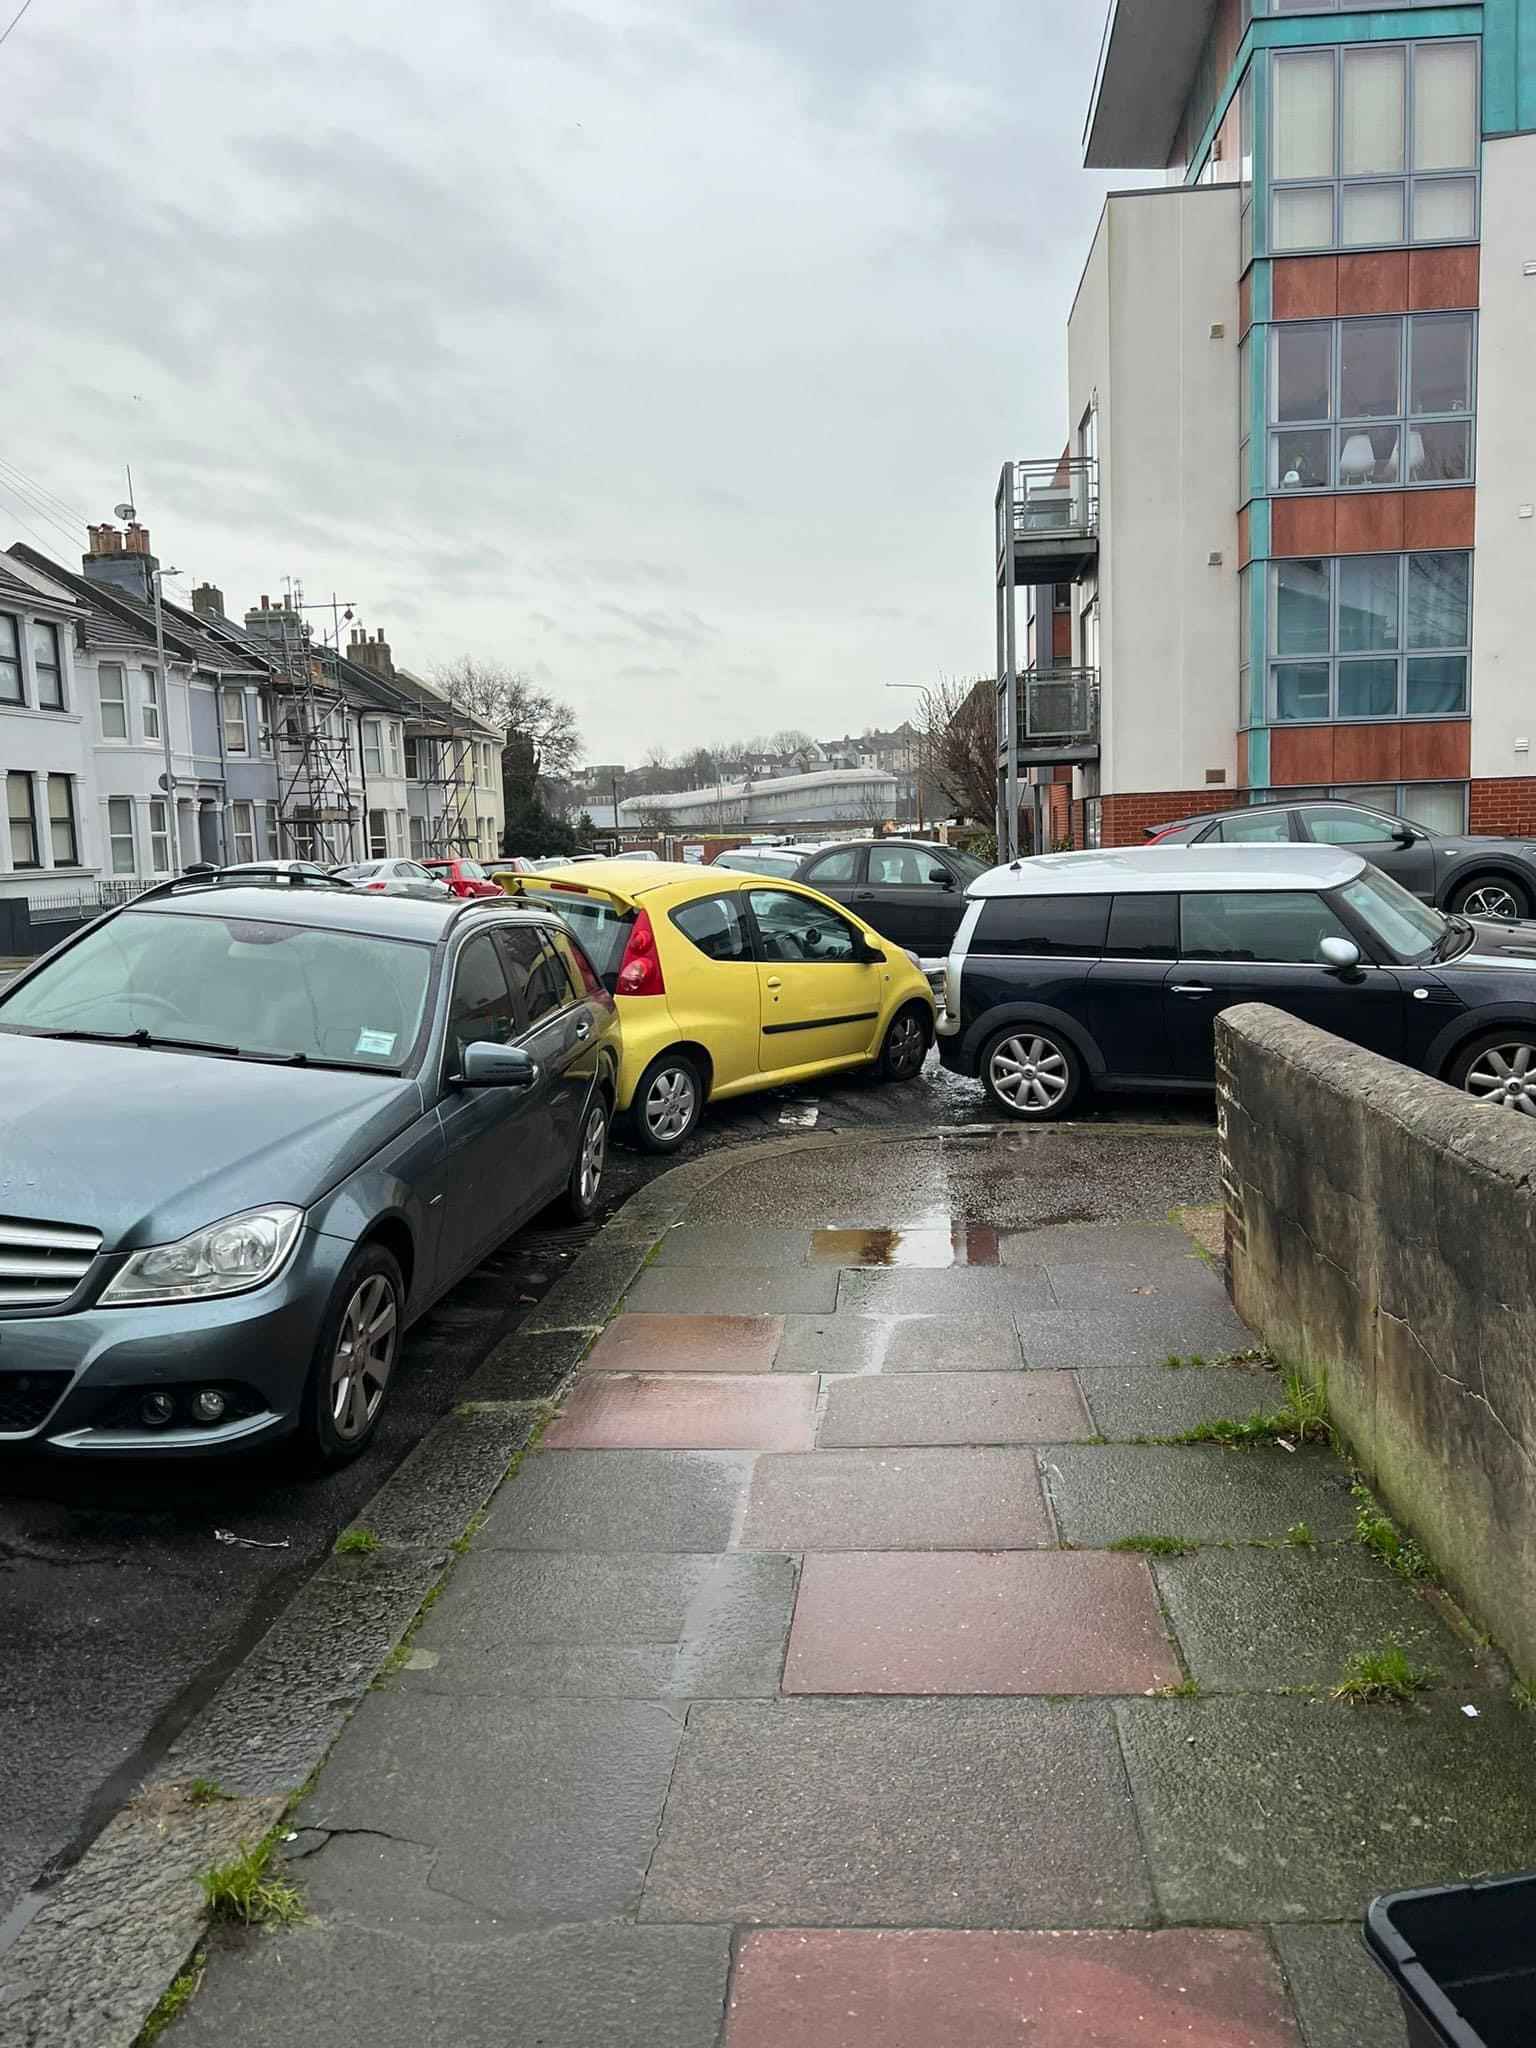 Photograph of AP07 OZS - a Yellow Peugeot 107 parked in Hollingdean by a non-resident who uses the local area as part of their Brighton commute. The first of two photographs supplied by the residents of Hollingdean.